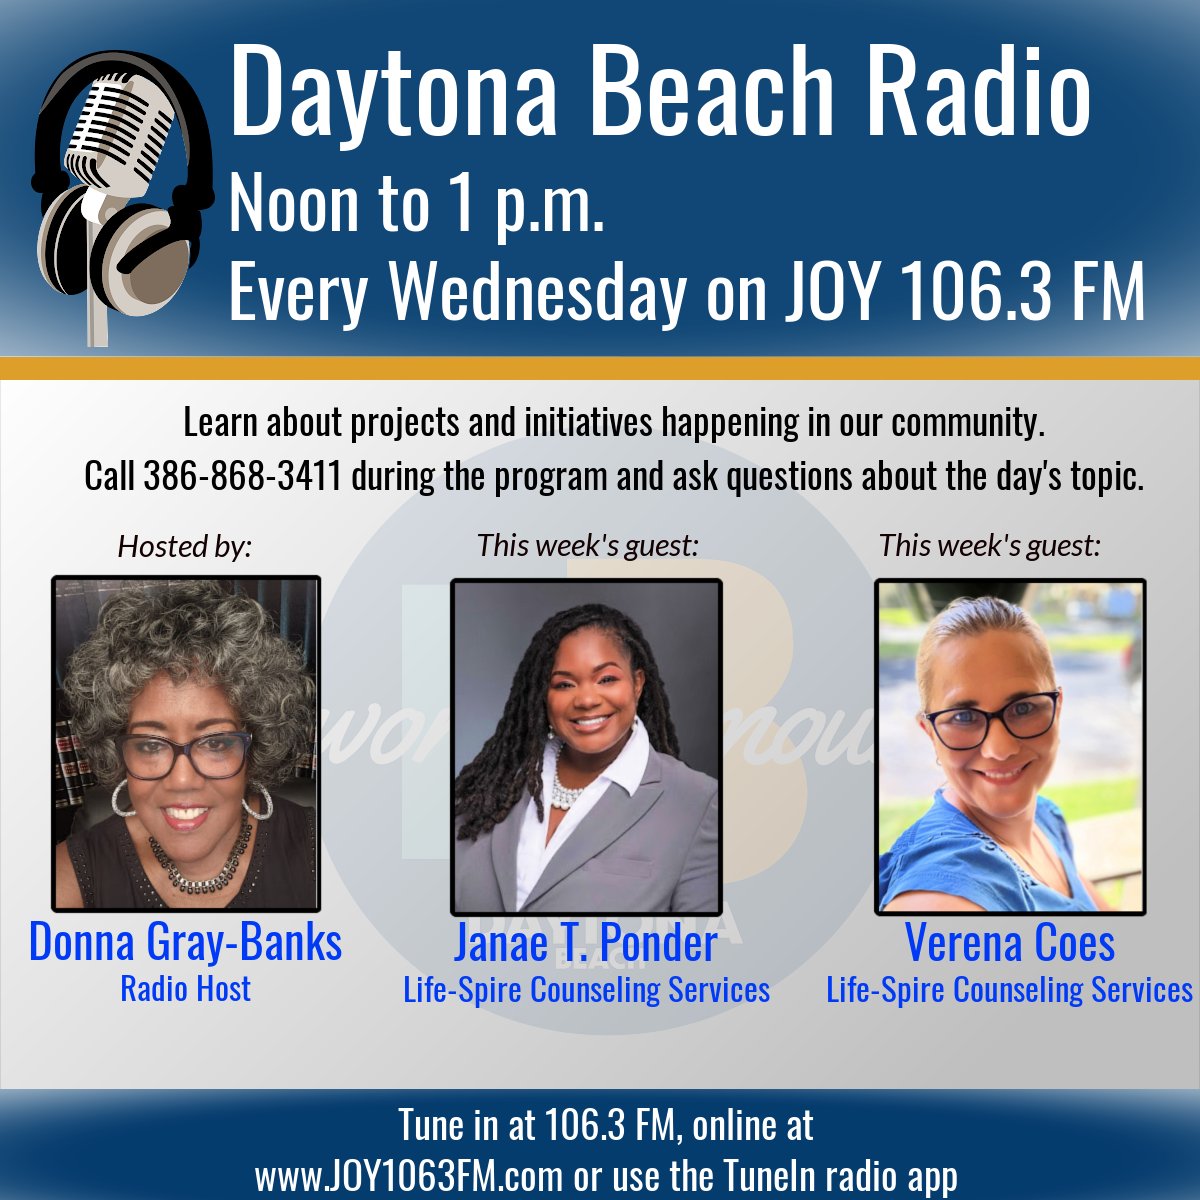 Tune in at noon this Wednesday to #DaytonaBeachRadio for a discussion with Janae T. Ponder and Verena Coes from Life-Spire Counseling Services. Call in with questions or comments at (386) 868-3411. #CityDaytonaBeach #DaytonaBeachNews